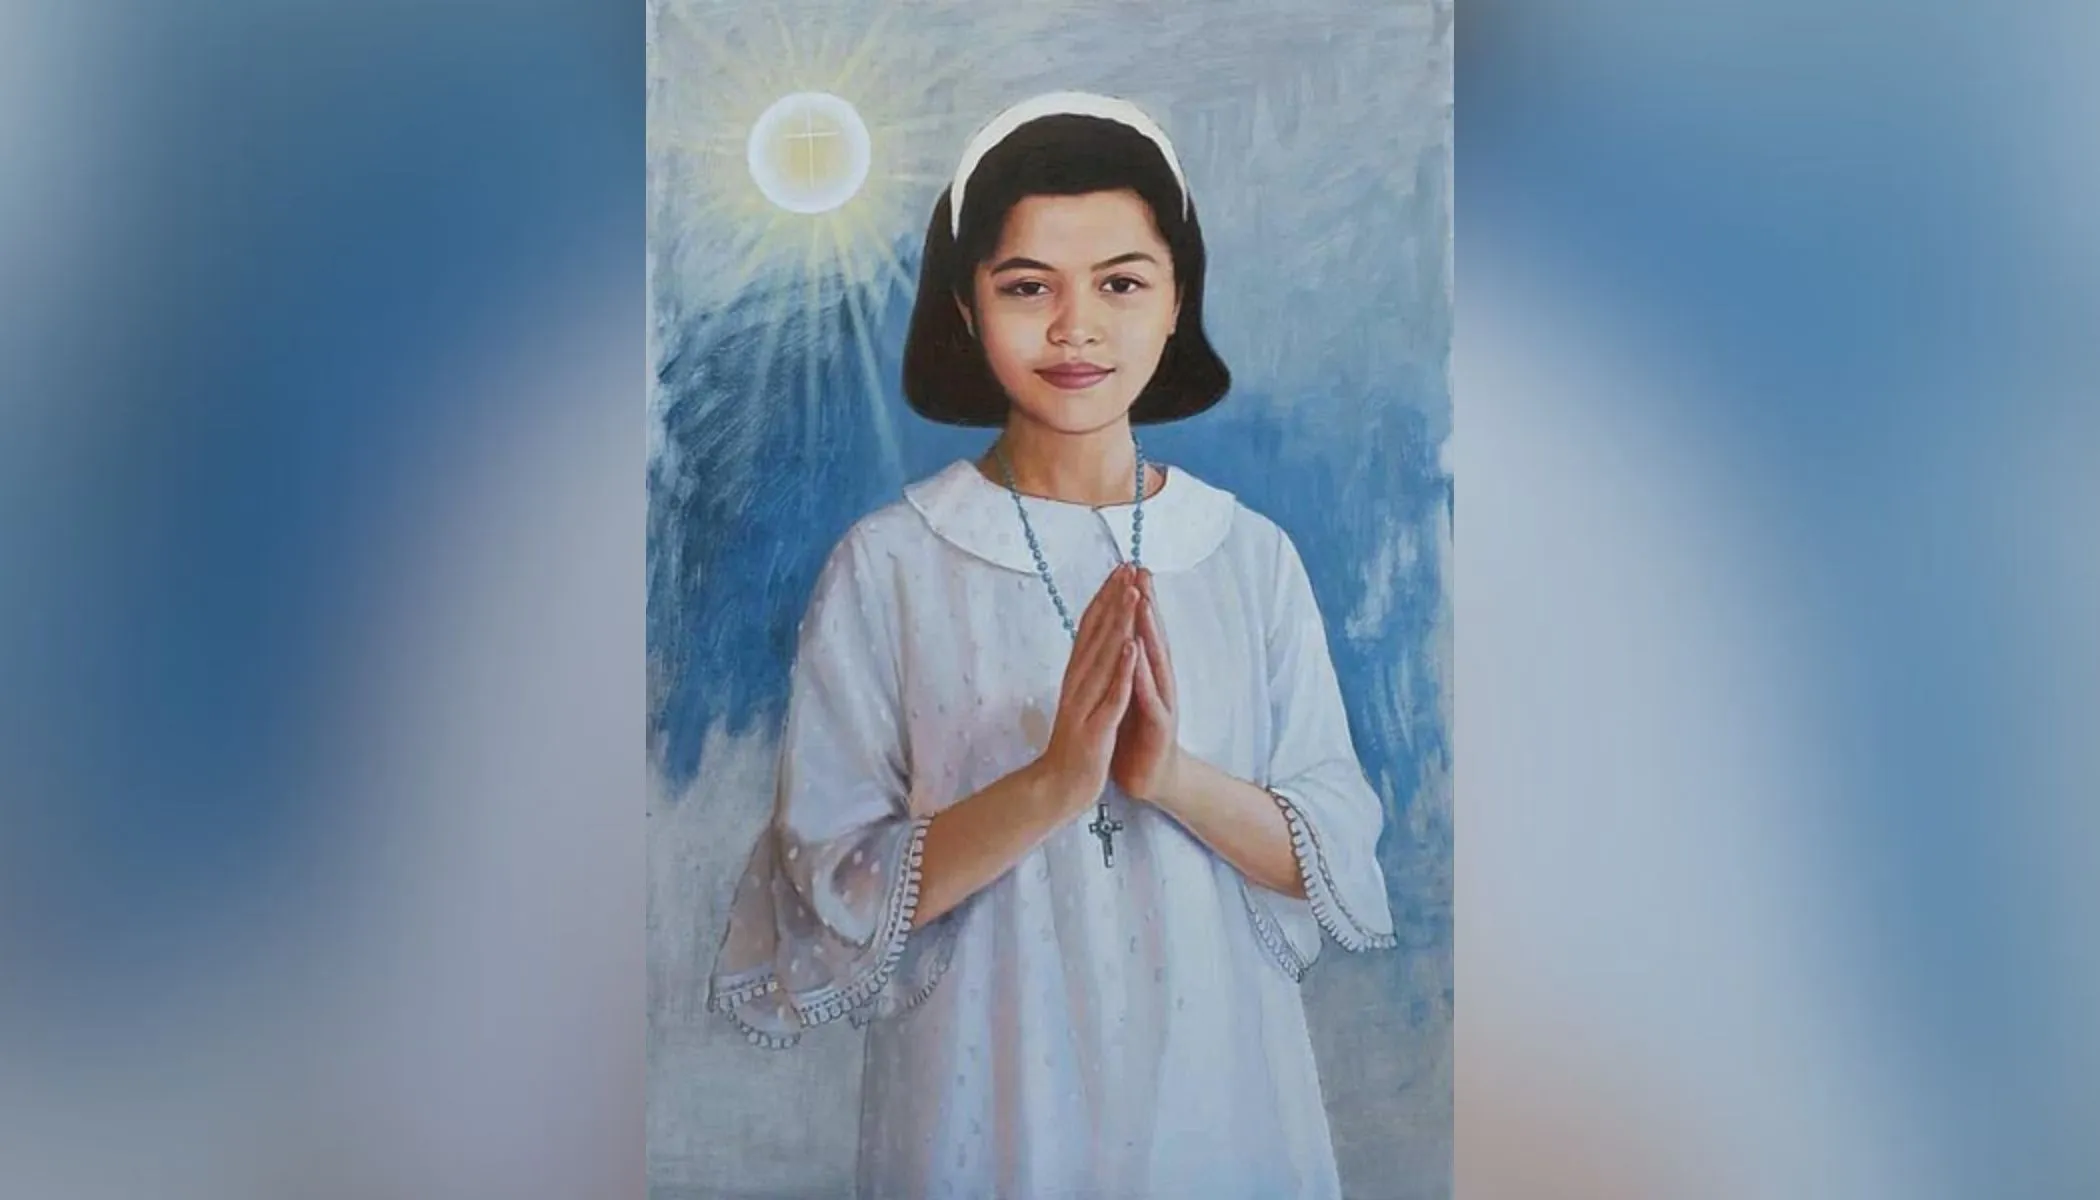 The official portrait of Servant of God Niña Ruíz-Abad was presented to the public during the opening session of the diocesan phase of her cause for beatification and canonization at the Cathedral Church of St. William the Hermit in Laoag City on Sunday, April 7, 2024.?w=200&h=150